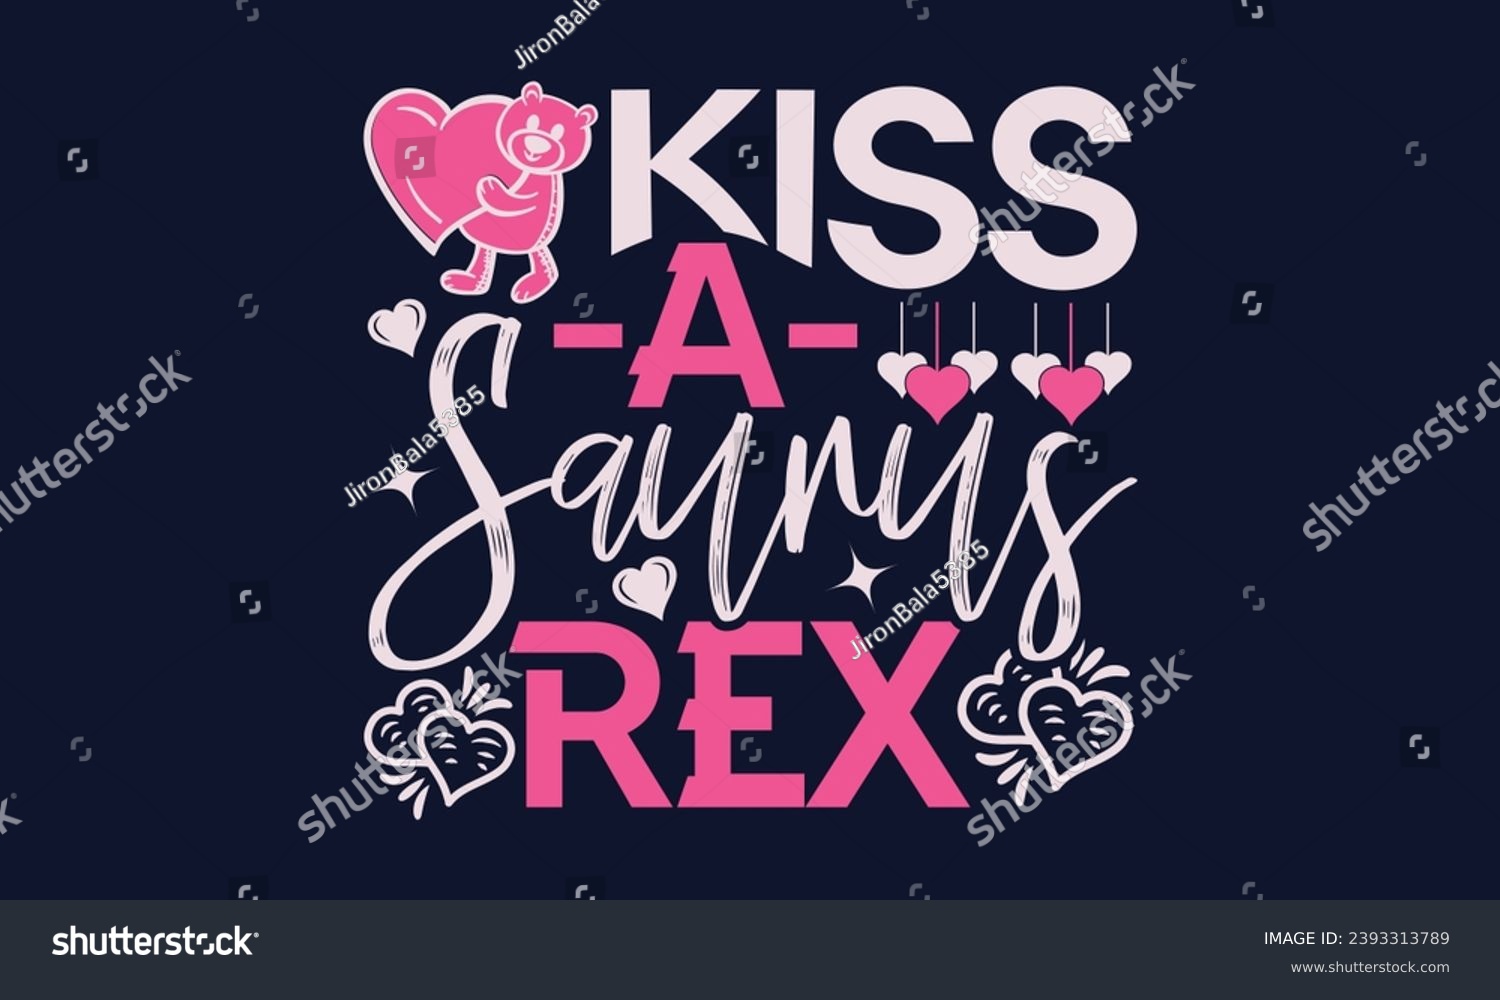 SVG of Kiss -A- Saurus Rex - Valentines Day T- Shirt Design,  Typography   Design, For Stickers, Templet, Mugs, Etc. Vector EPS 10 FILS Editable Files. svg